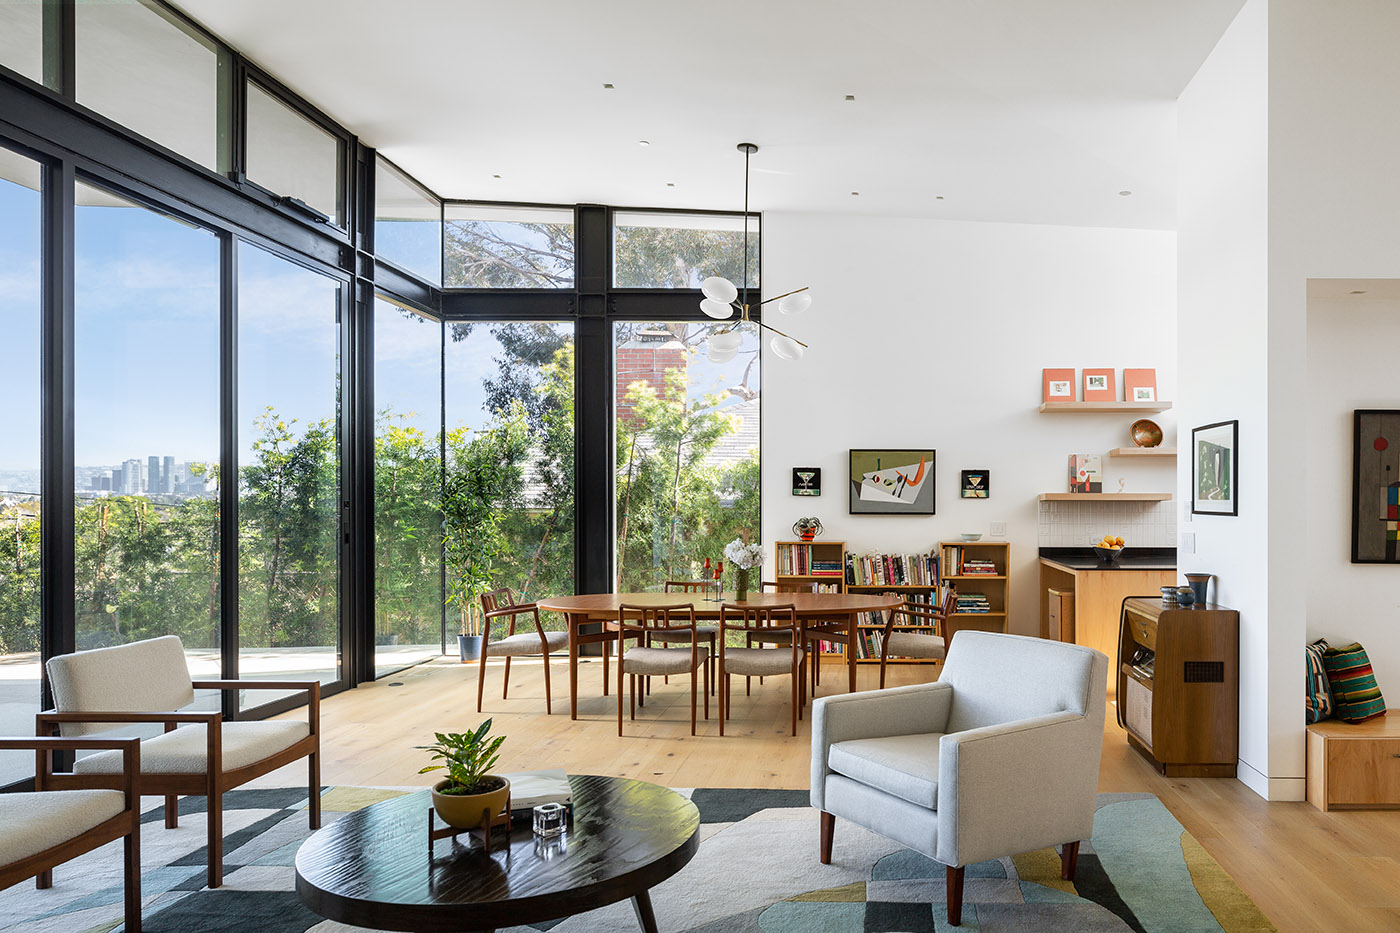 In California, at Mar Vista Residence, the rational approach of mid-century modernism blends with warm finishes and contemporary architectural ideas